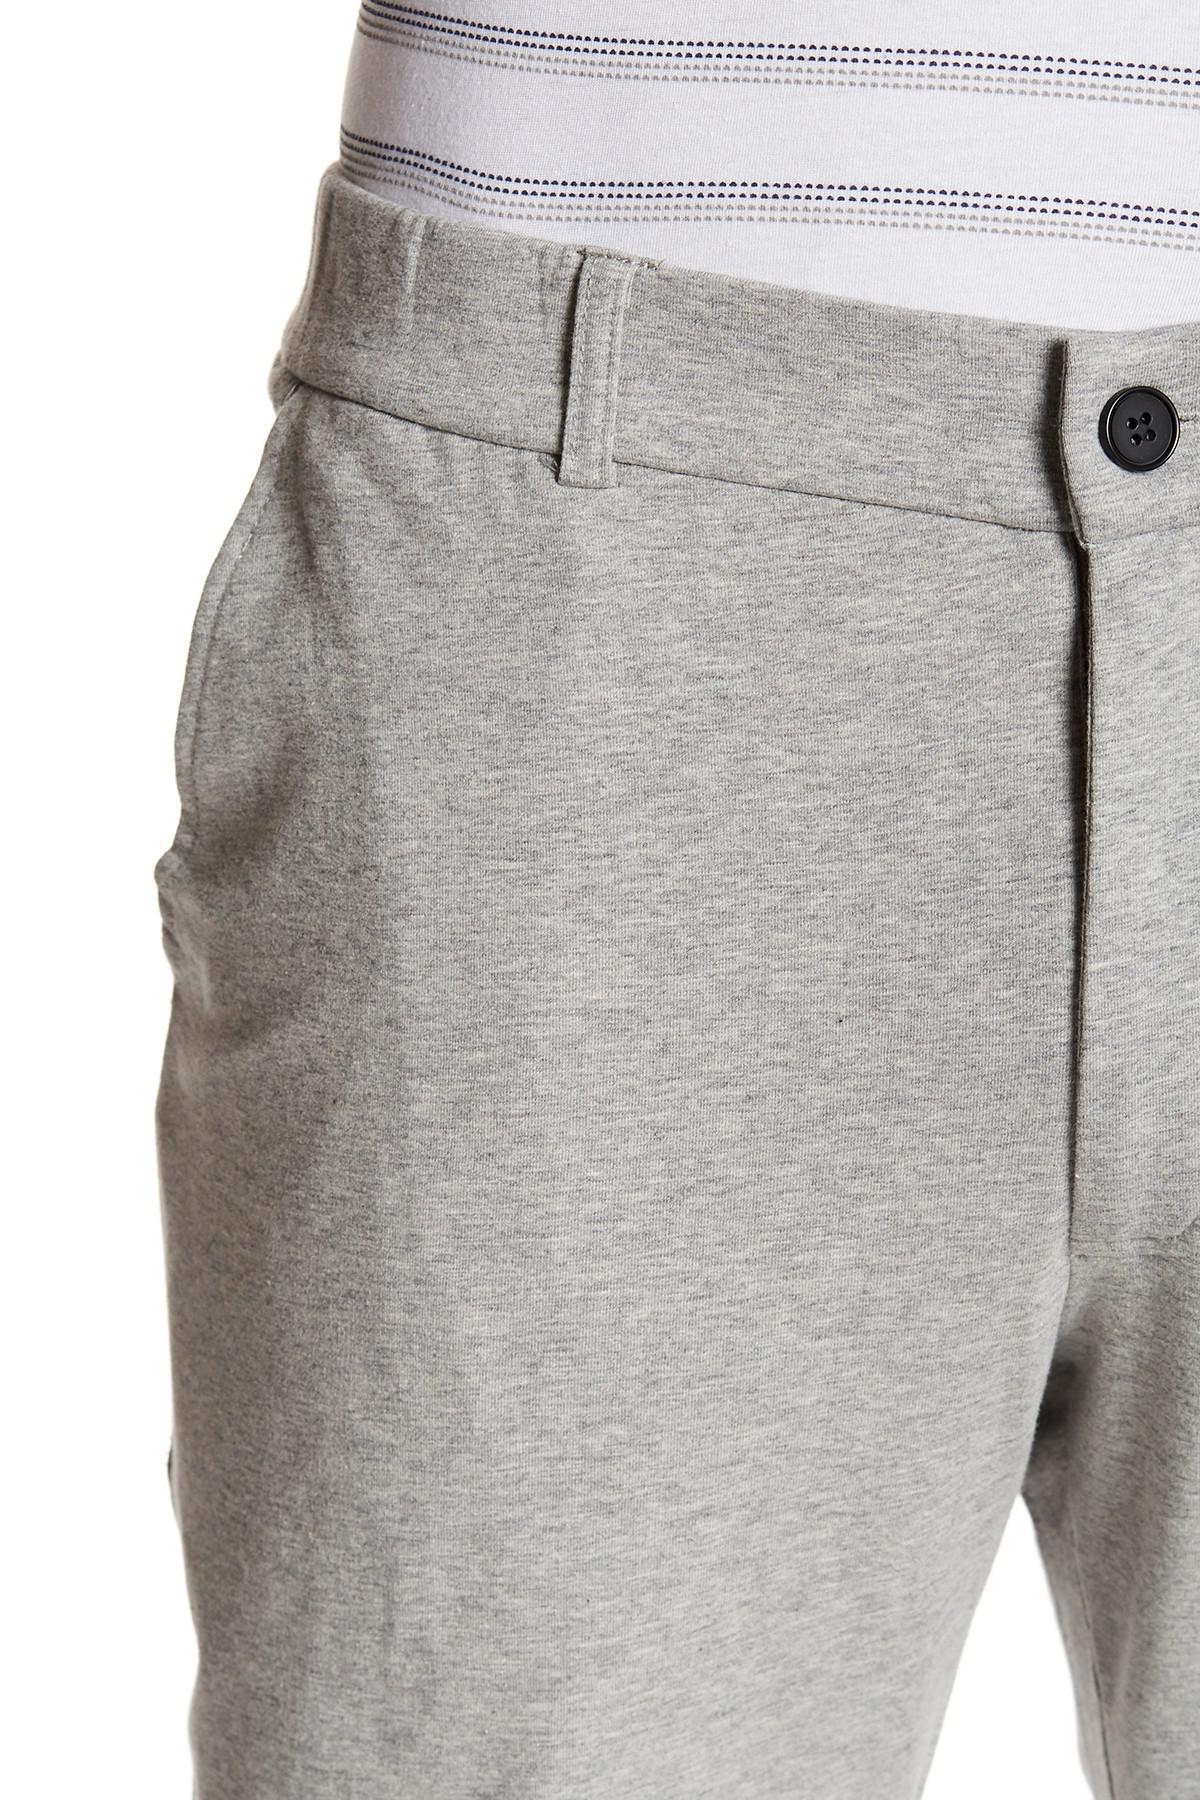 Kenneth Cole Cotton Zip Fly Sweatpants in Heather Grey (Gray) for Men ...